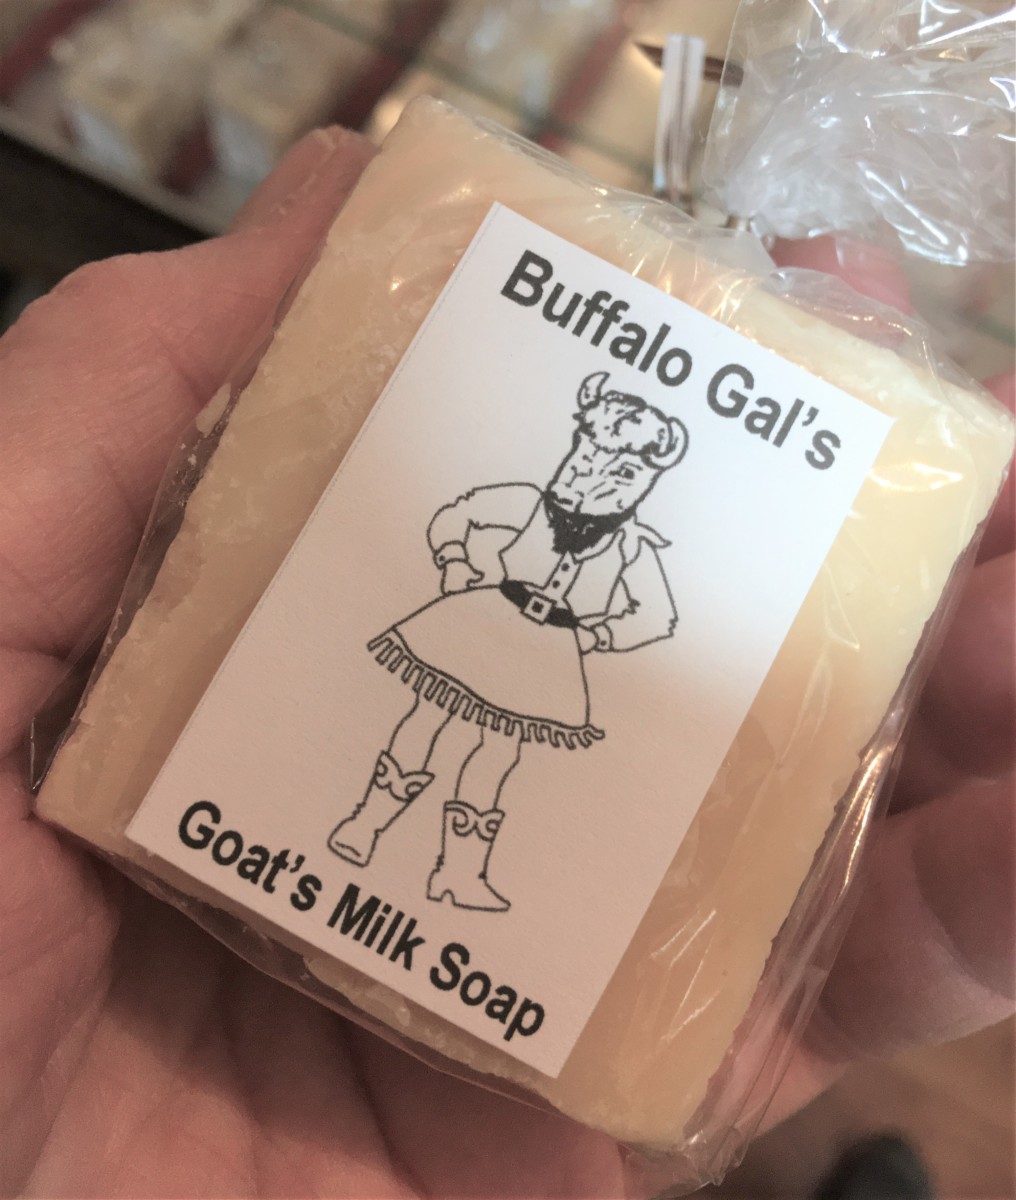 Milksoaps  Will o' the Wisp